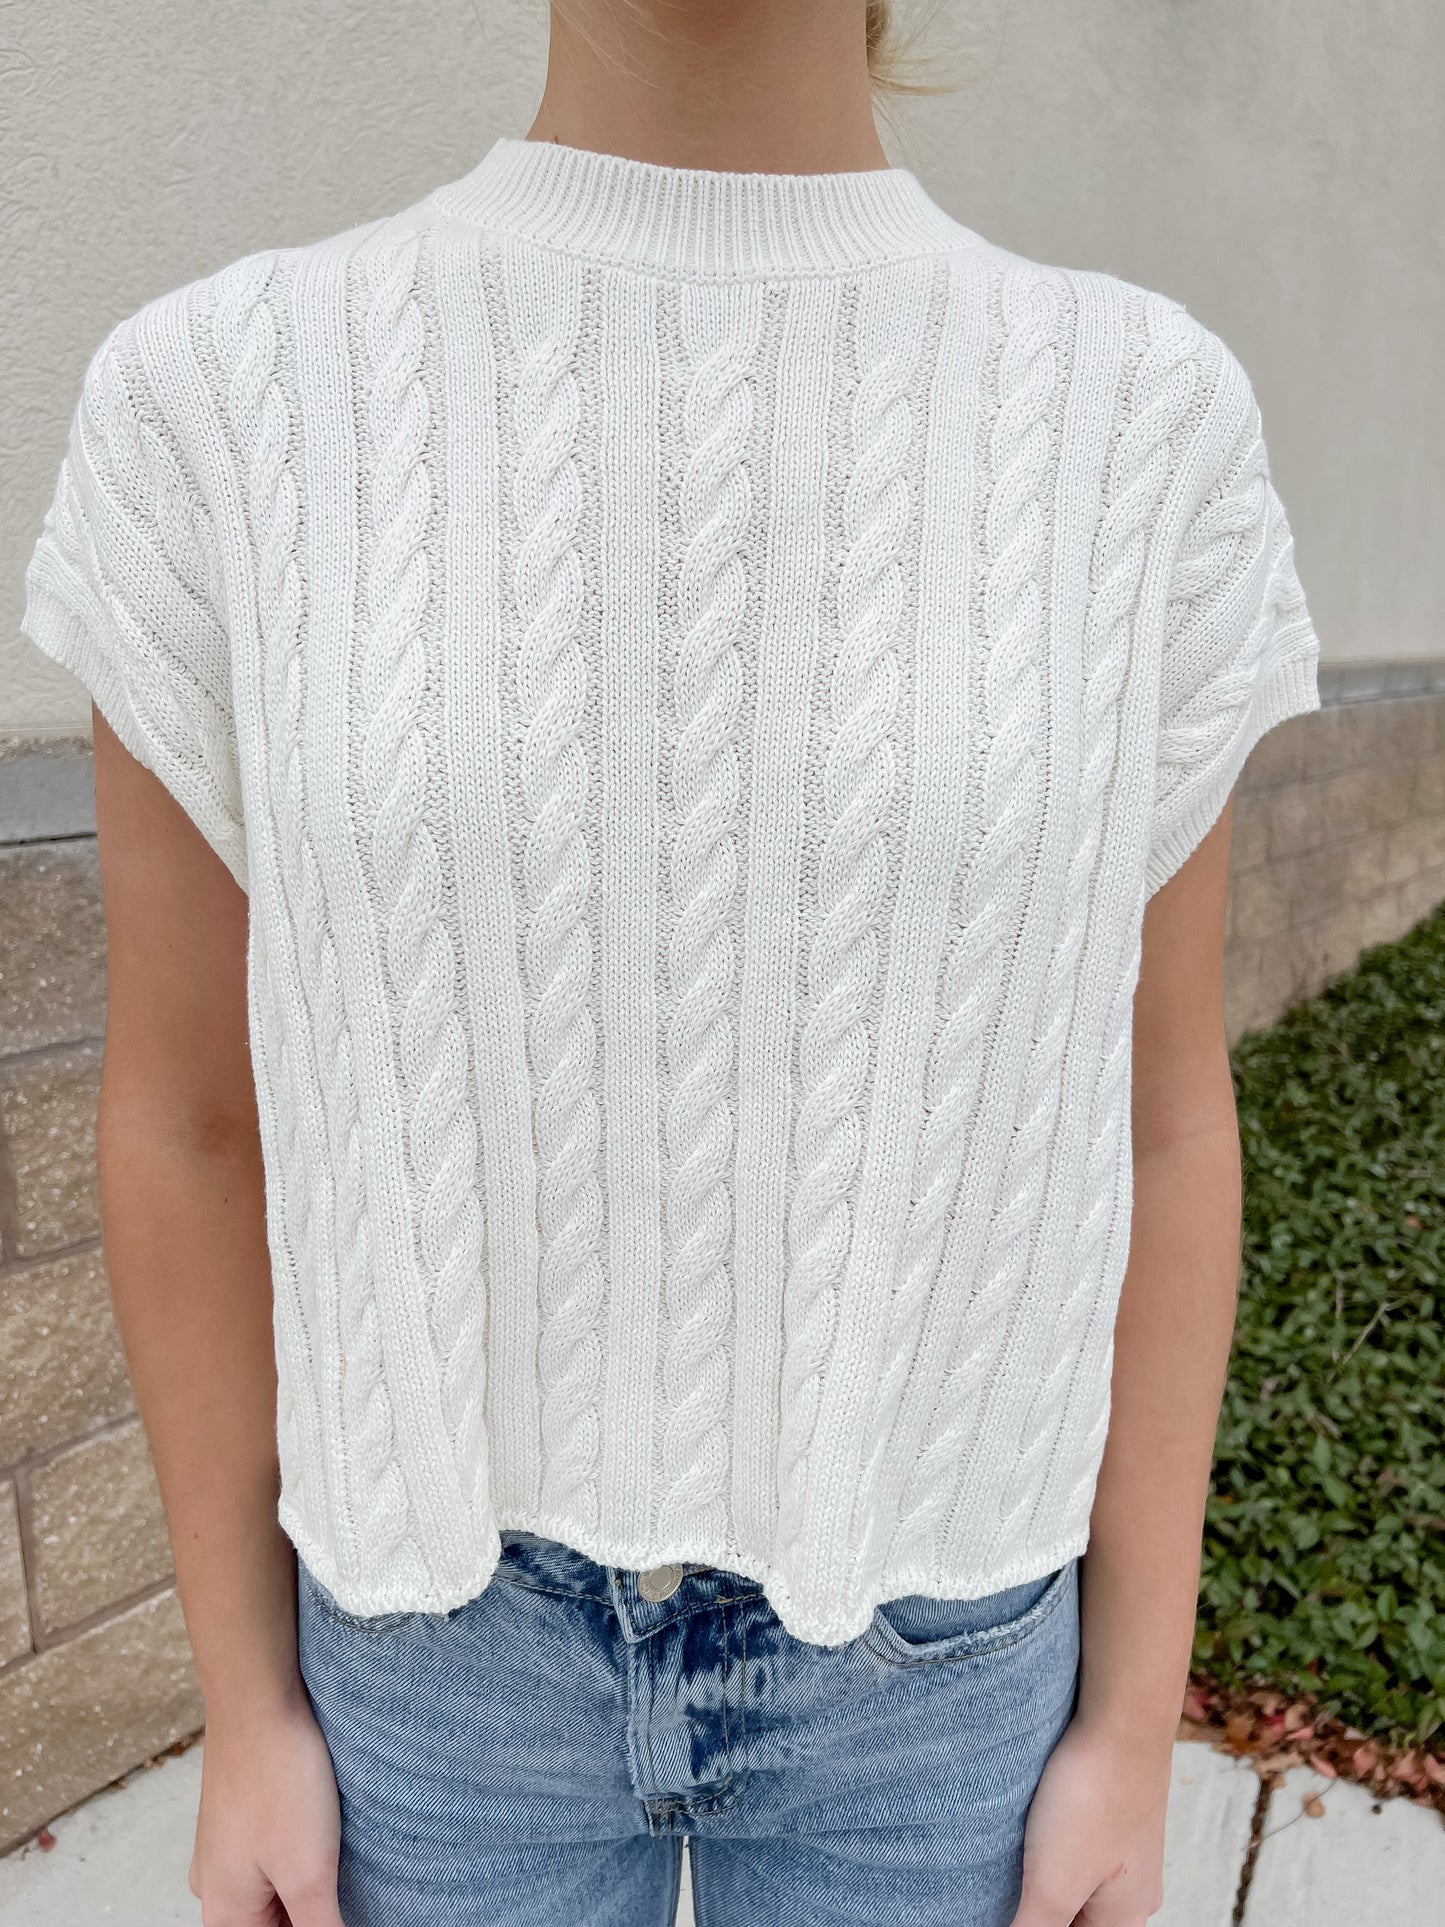 Sweater Top: White